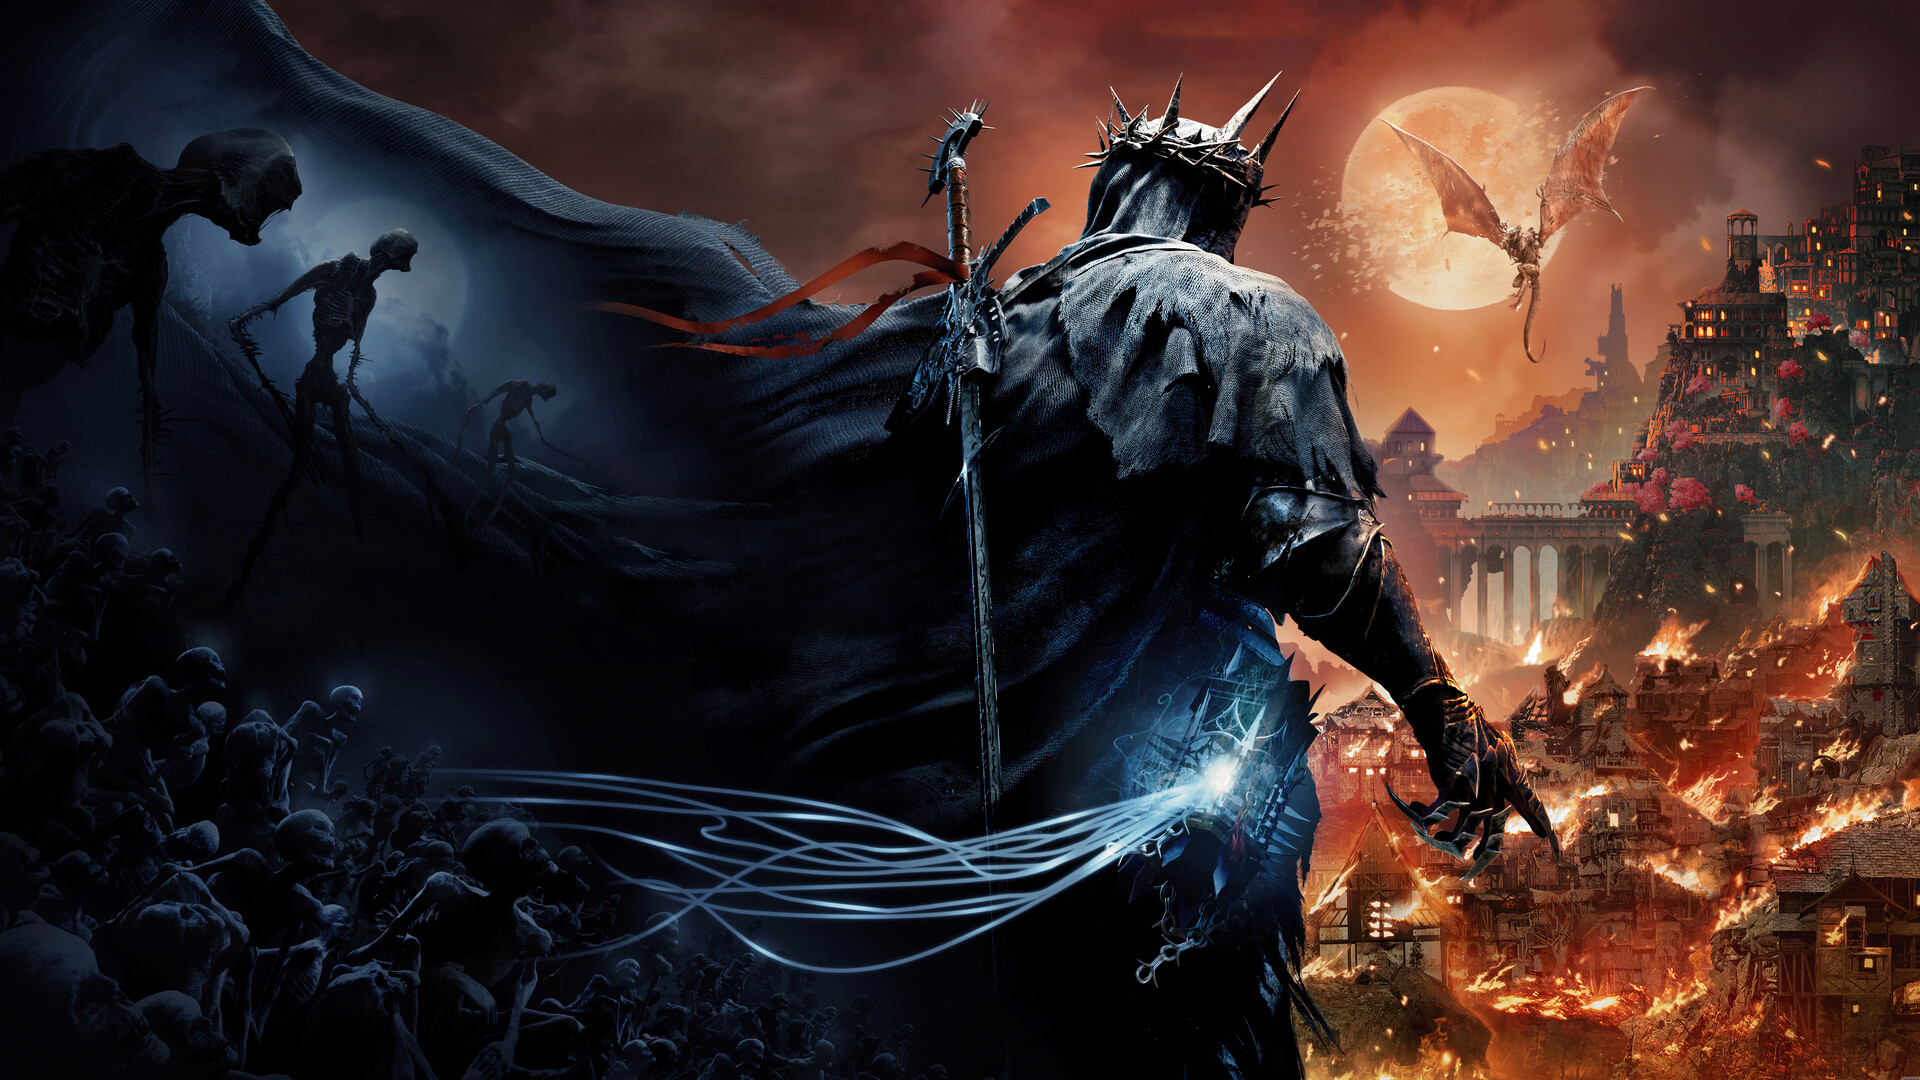 Lords of the Fallen' Release Date, Trailer, Gameplay, and Developer